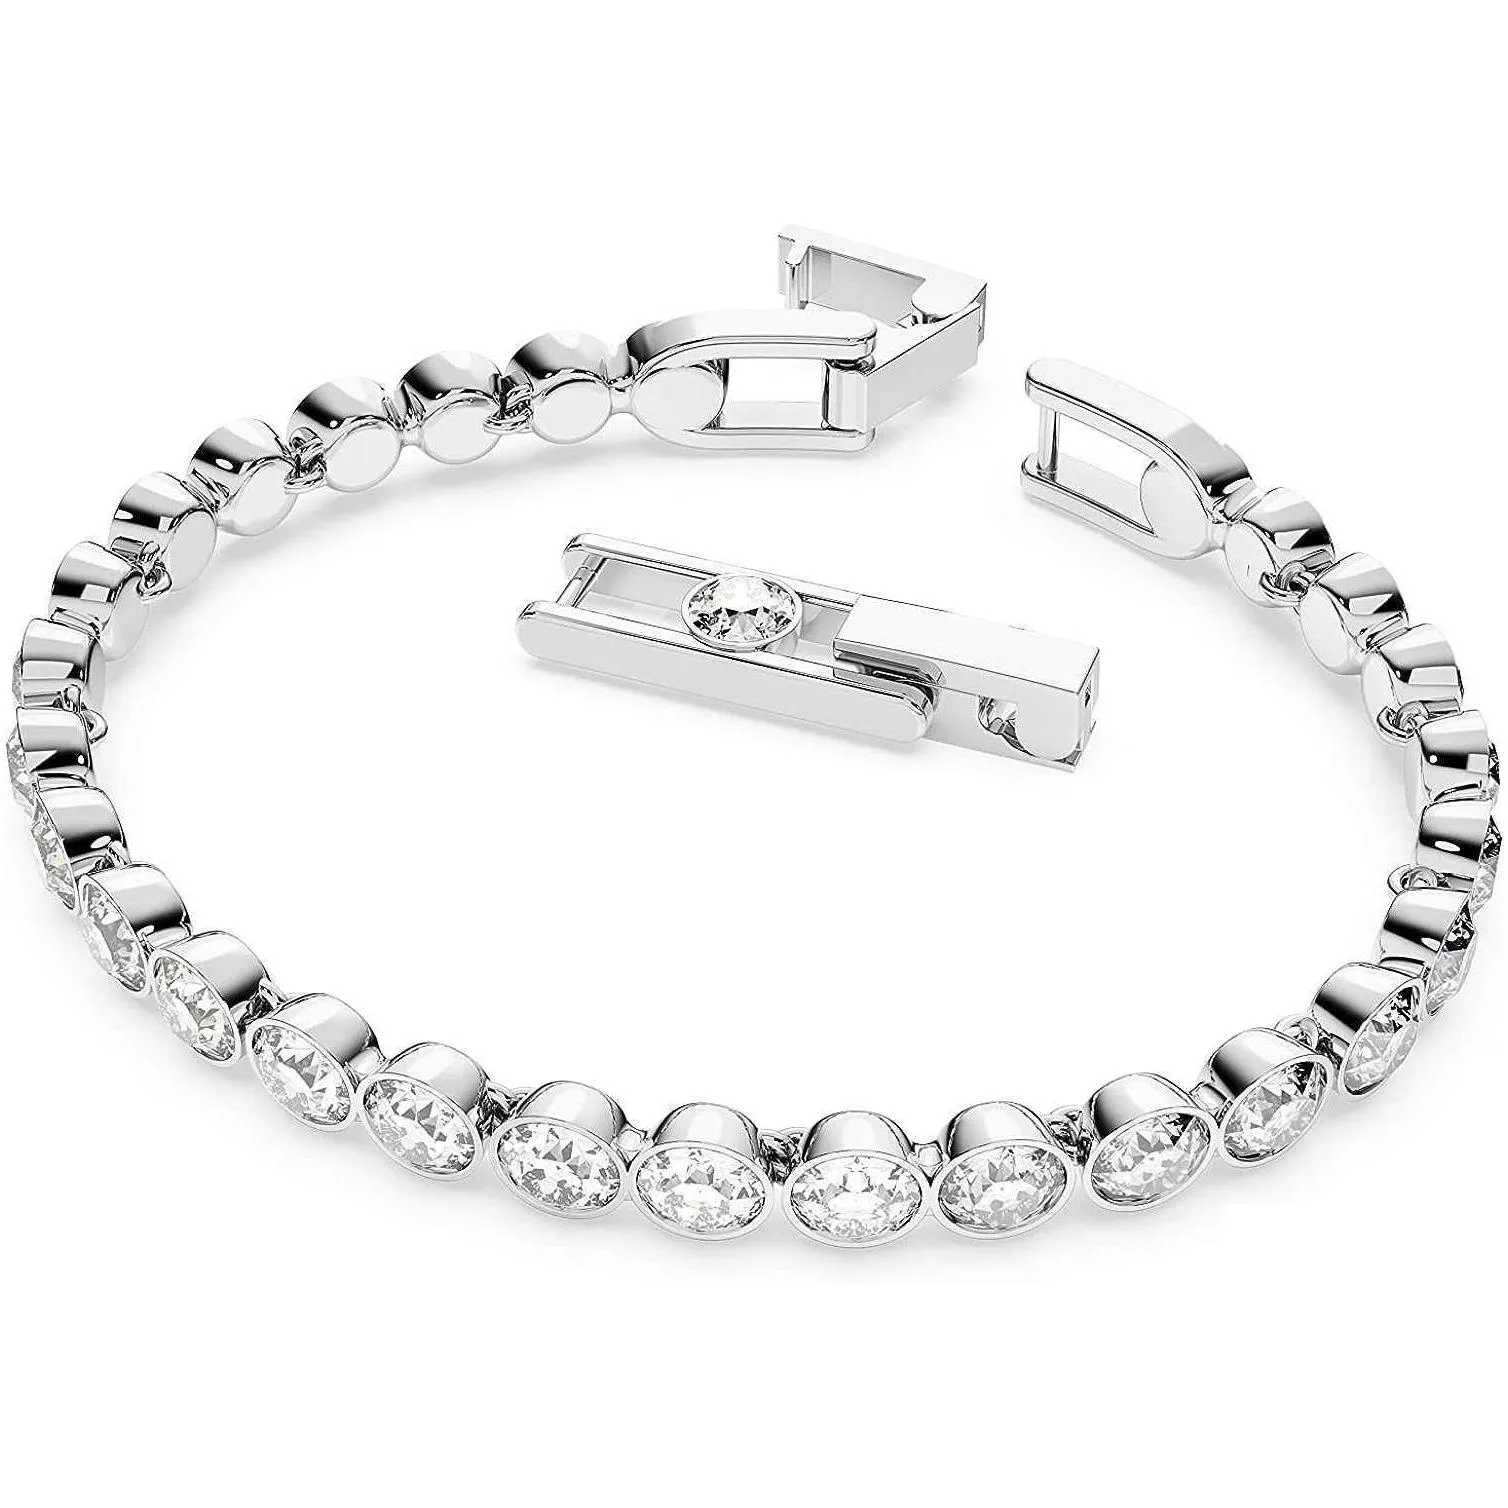 Swarovski Tennis Bracelet and Earring Jewelry Collection Rhodium Finish Clear Crystals